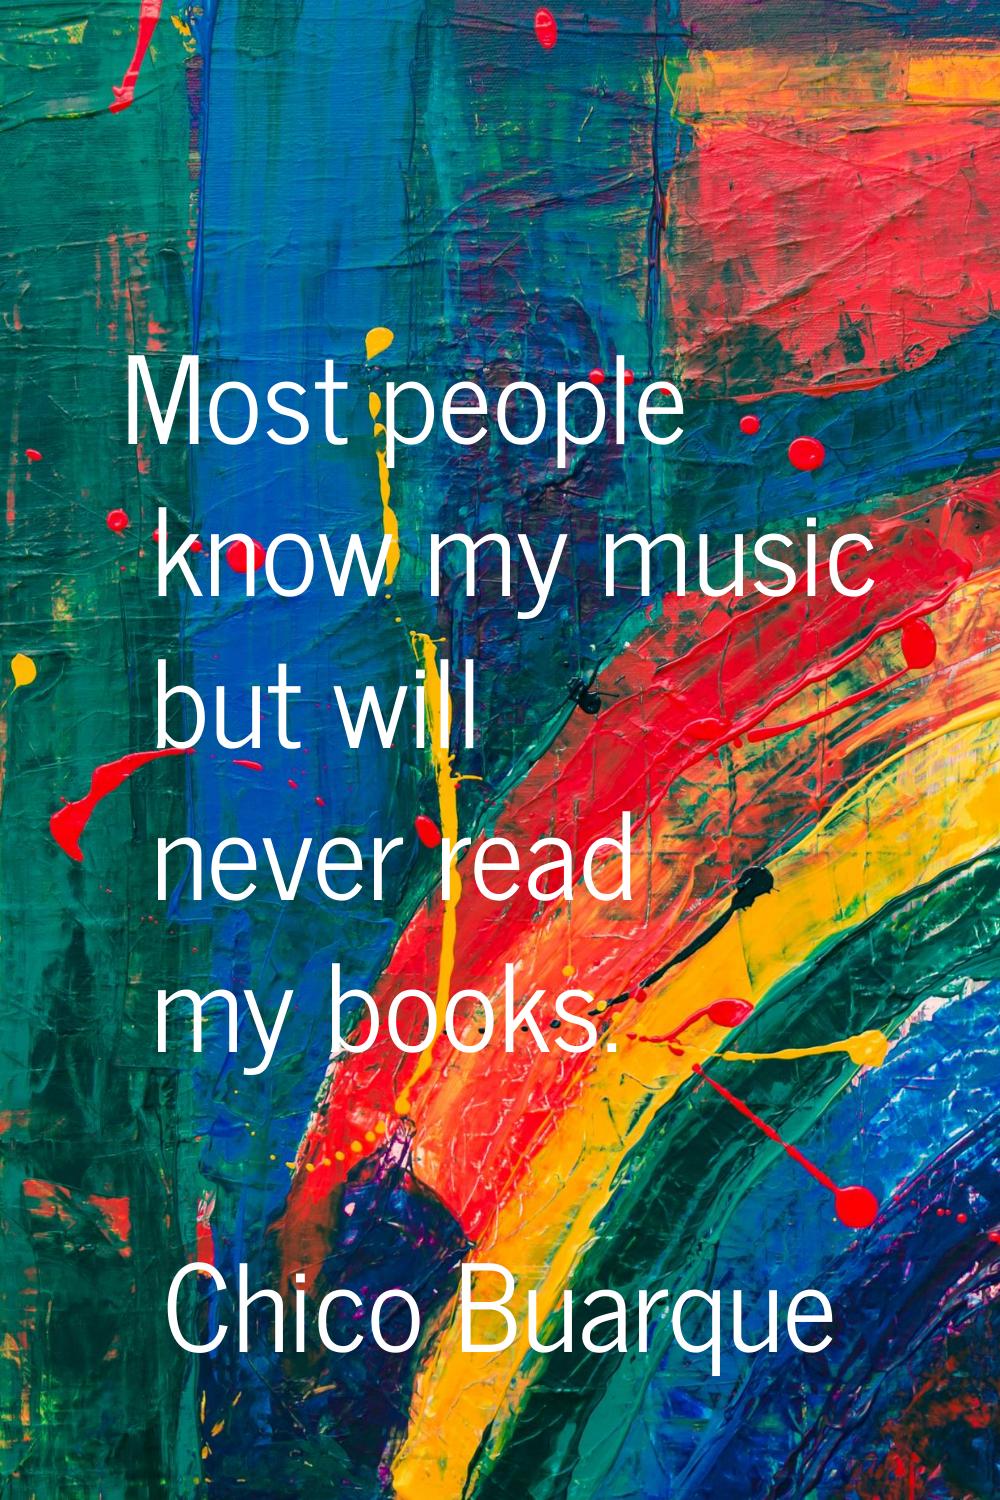 Most people know my music but will never read my books.